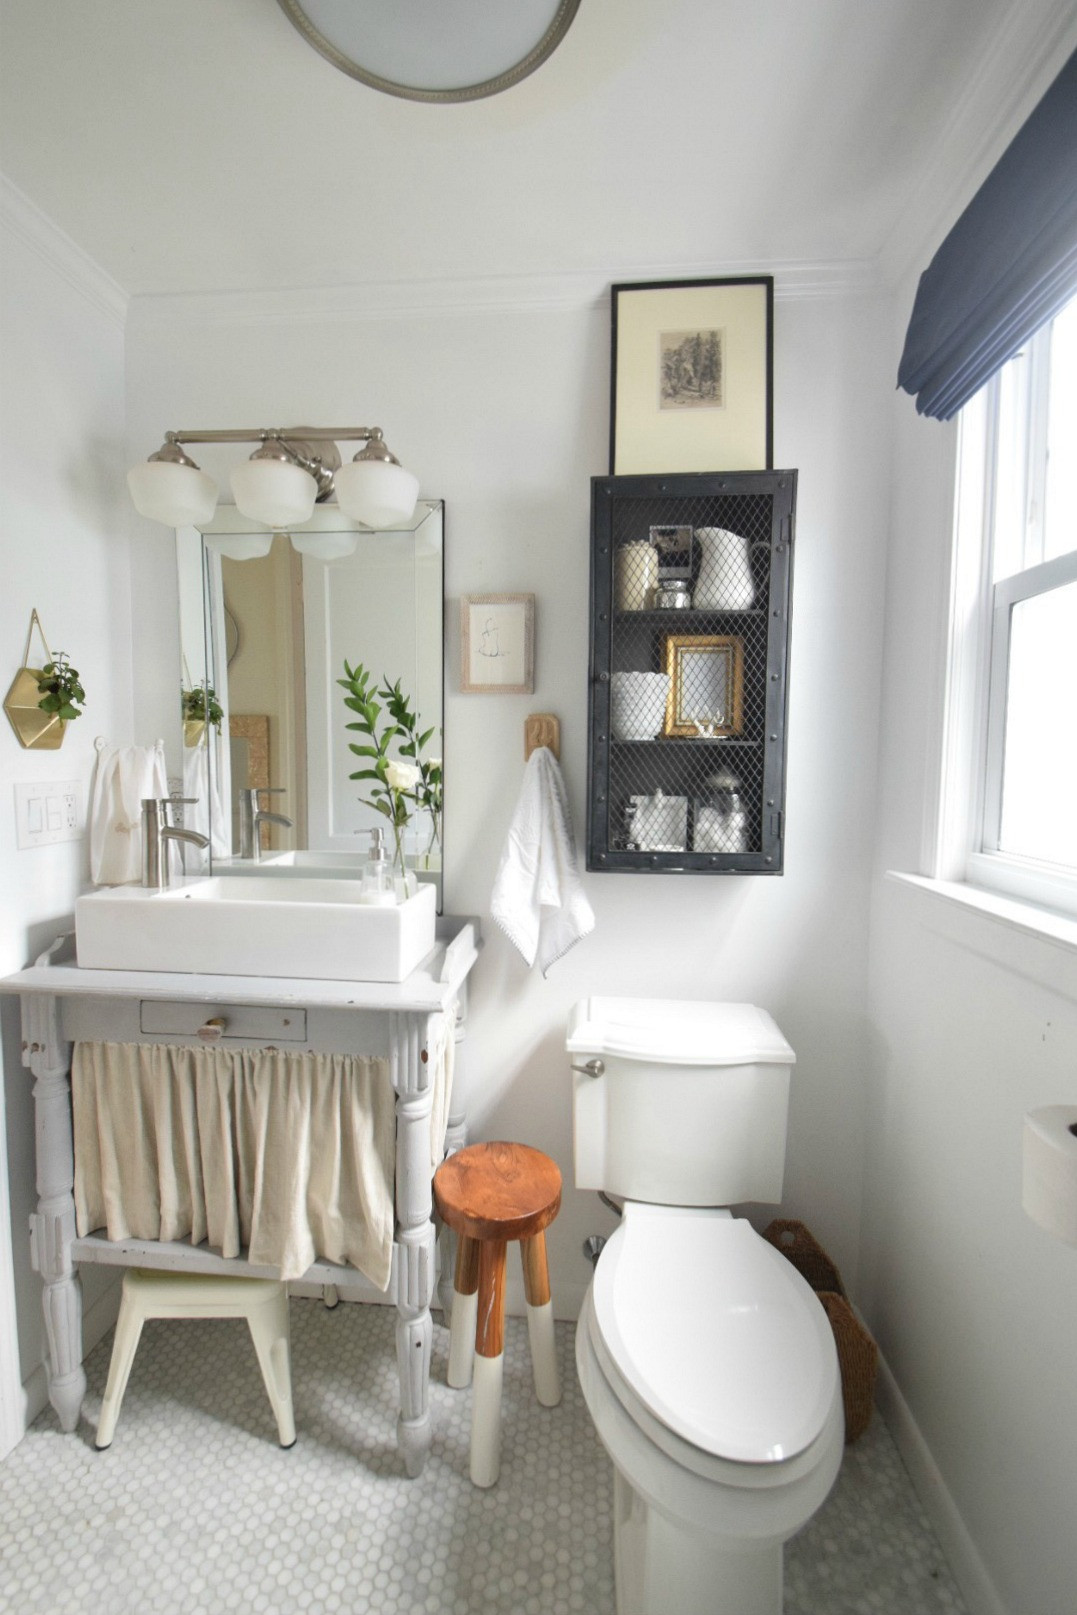 Small Bathroom Decorating Ideas
 Small Bathroom Ideas and Solutions in our Tiny Cape